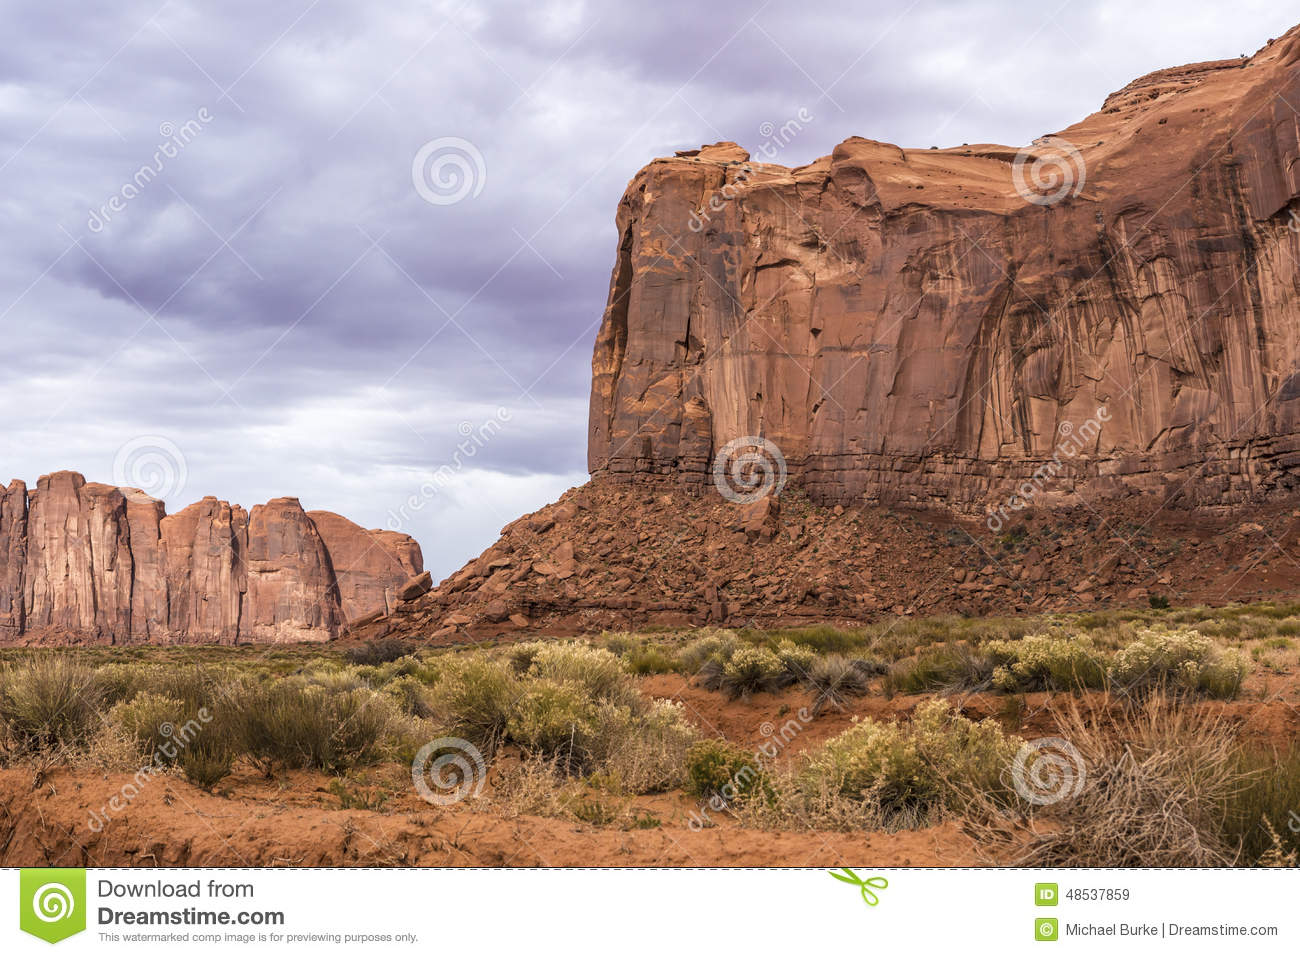 Colorado Plateau clipart #6, Download drawings